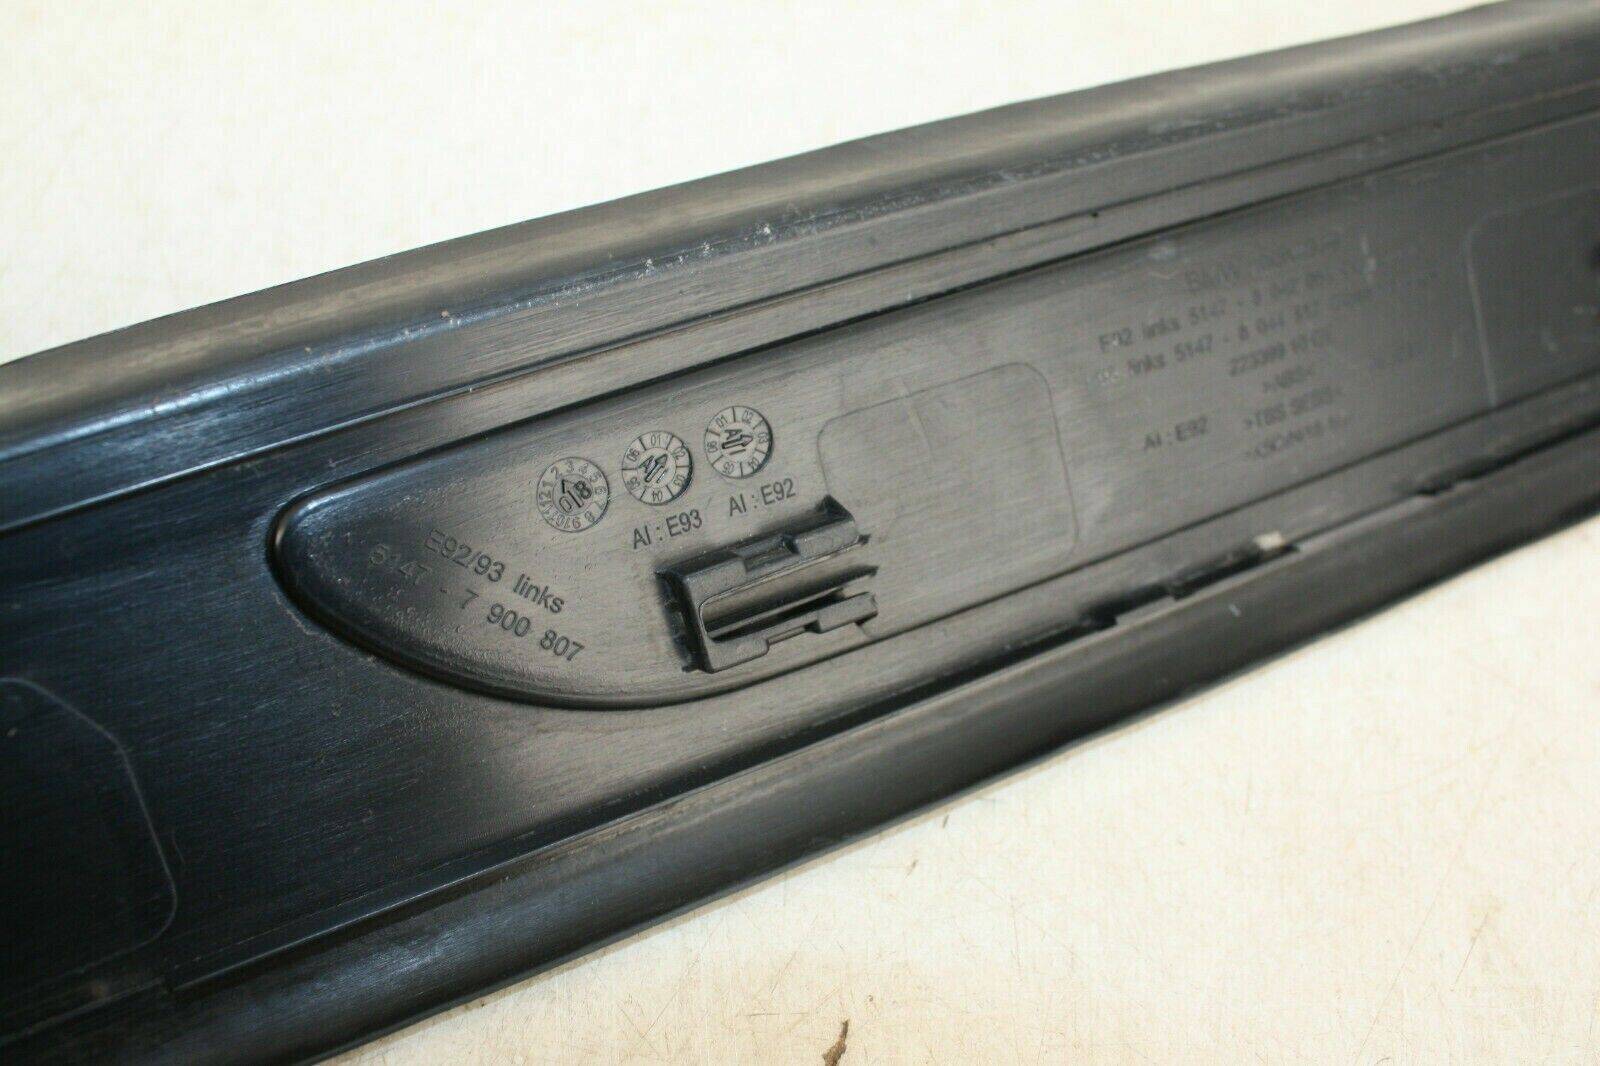 BMW-3-SERIES-FRONT-LEFT-DOOR-ENTRANCE-SILL-STRIP-2006-TO-2010-175431720438-9